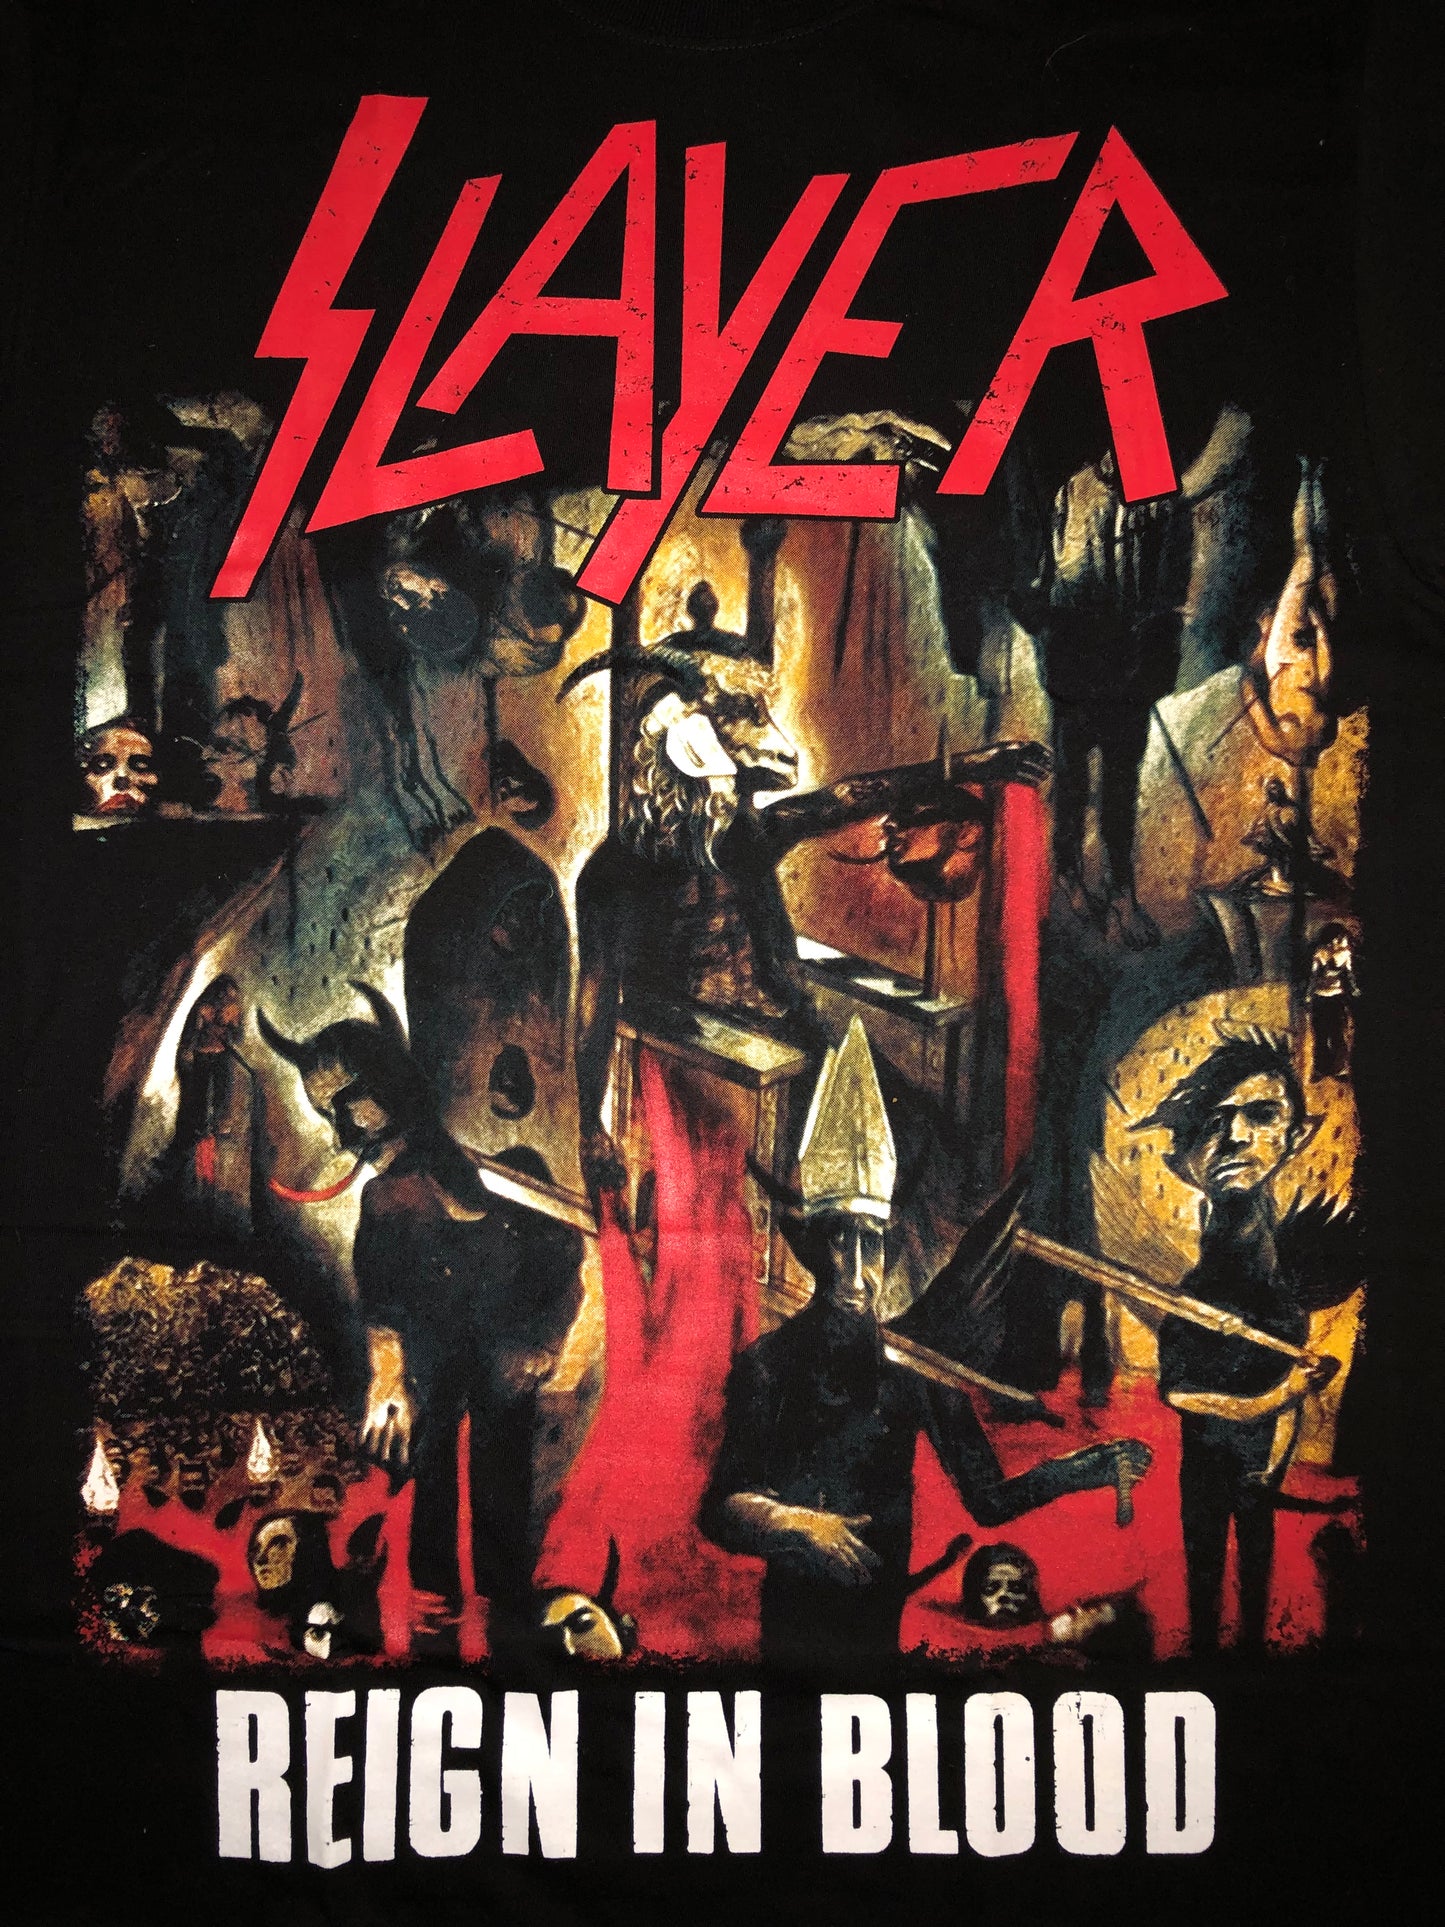 RCK205 - Slayer - Reign in Blood